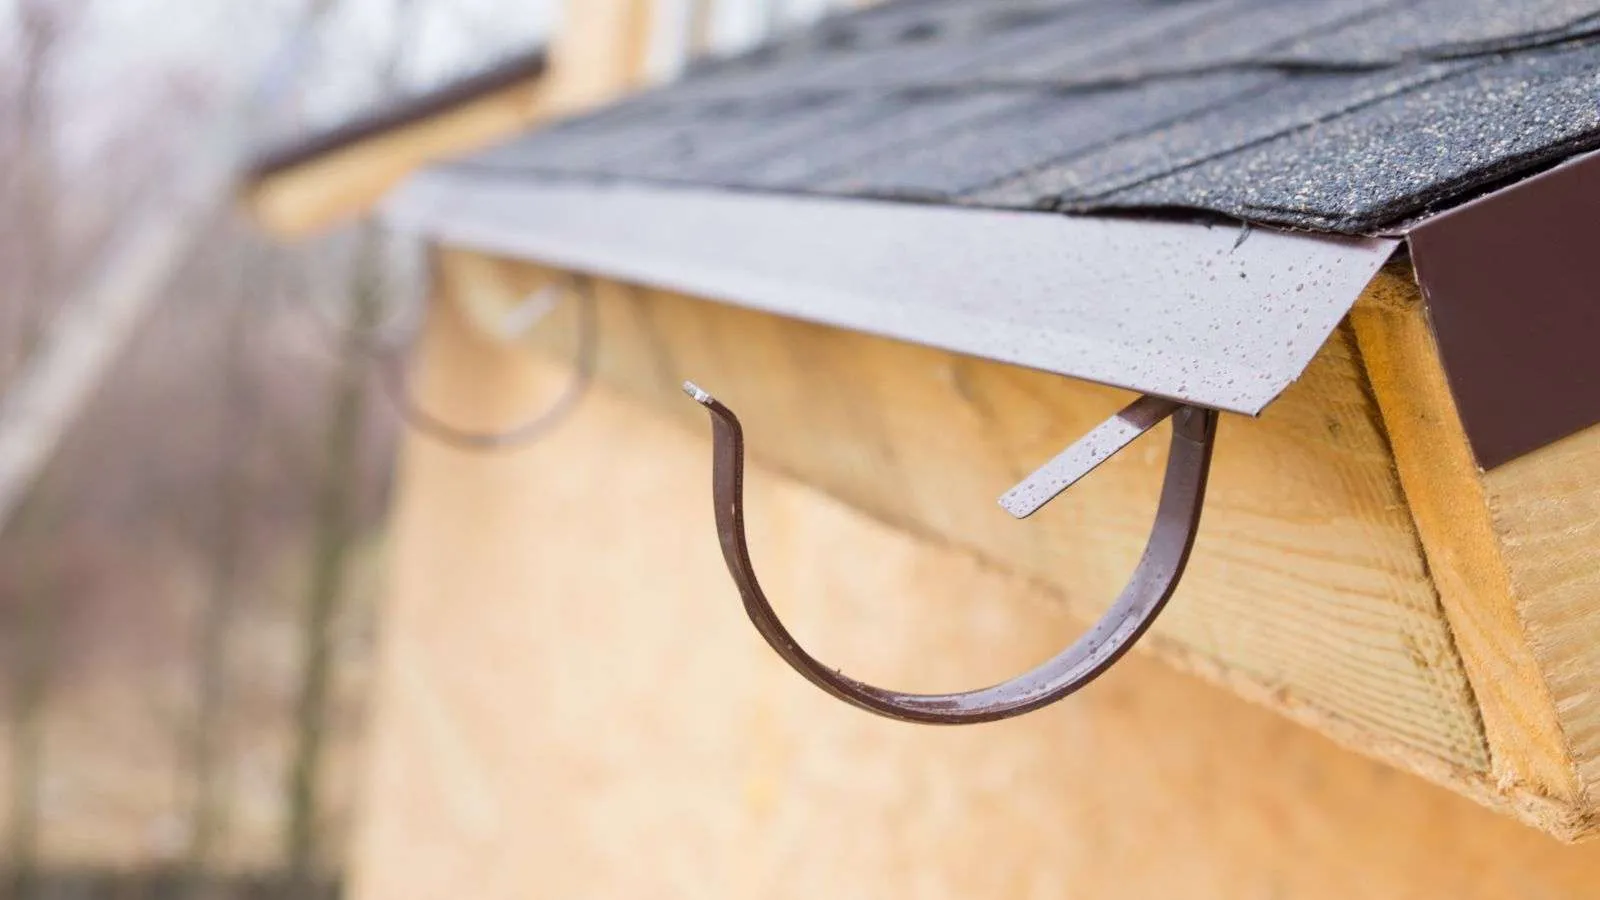 Easy steps to properly install gutter brackets and avoid issues - bighomeprojects.com